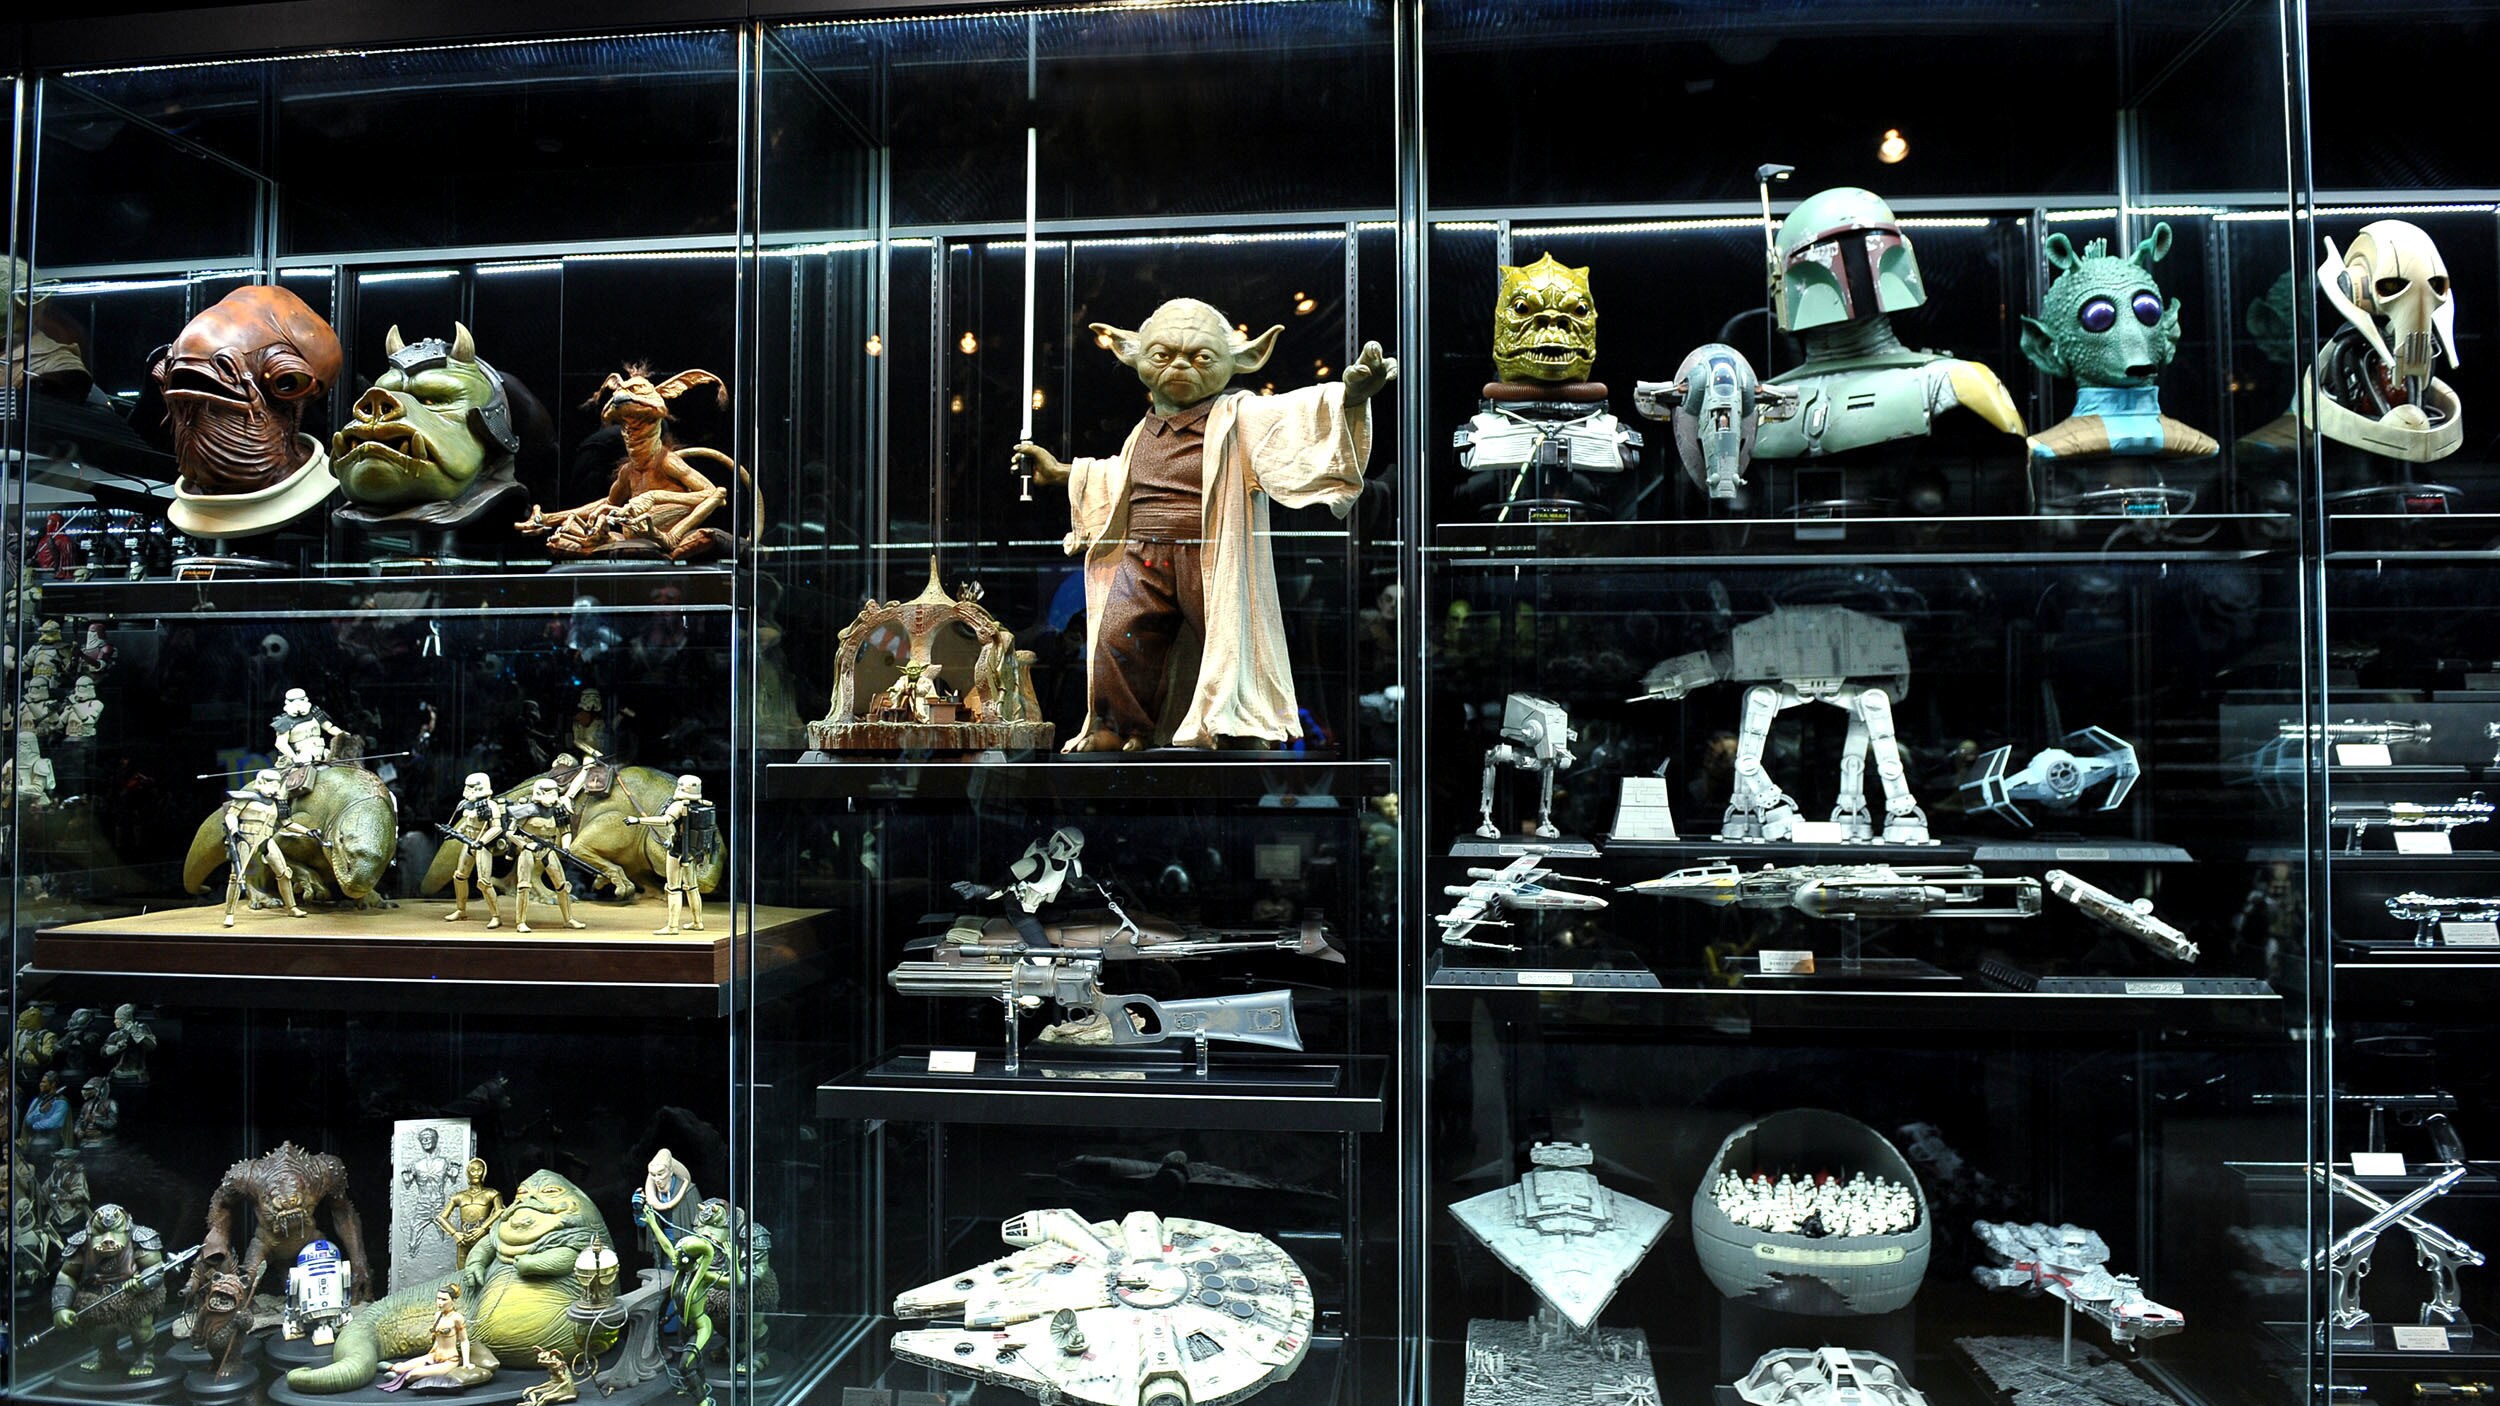 Cho Woong - Star Wars collection: Props of Yoda, bounty hunter, Boba Fett, and more